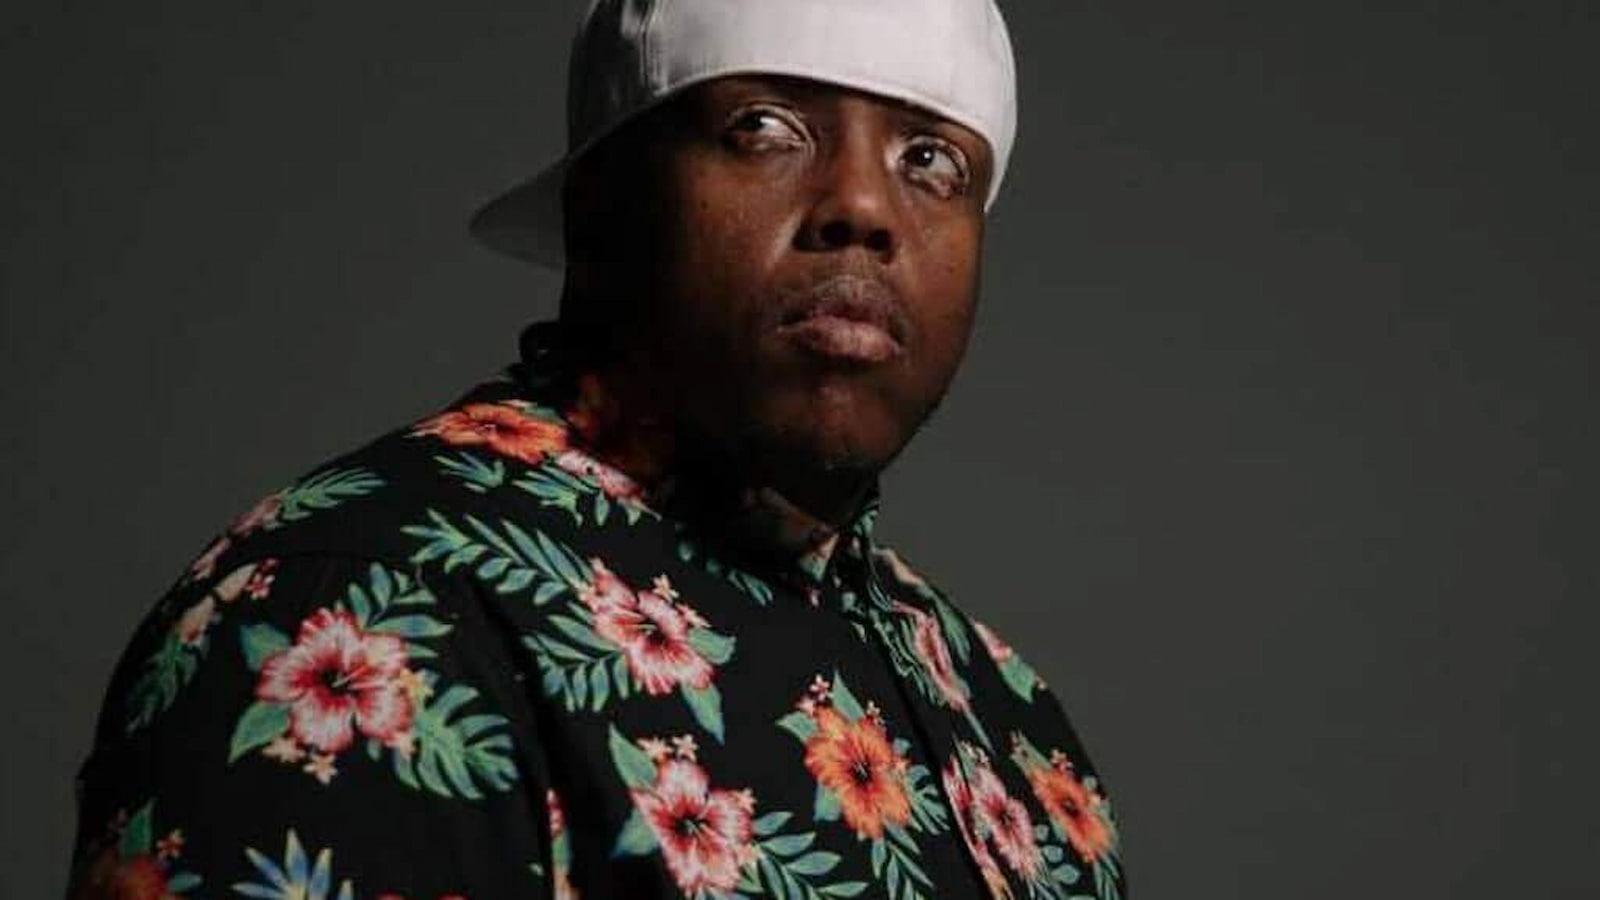 Krizz Kaliko Biography: Age, Career, Family, Personal Life, and Net Worth